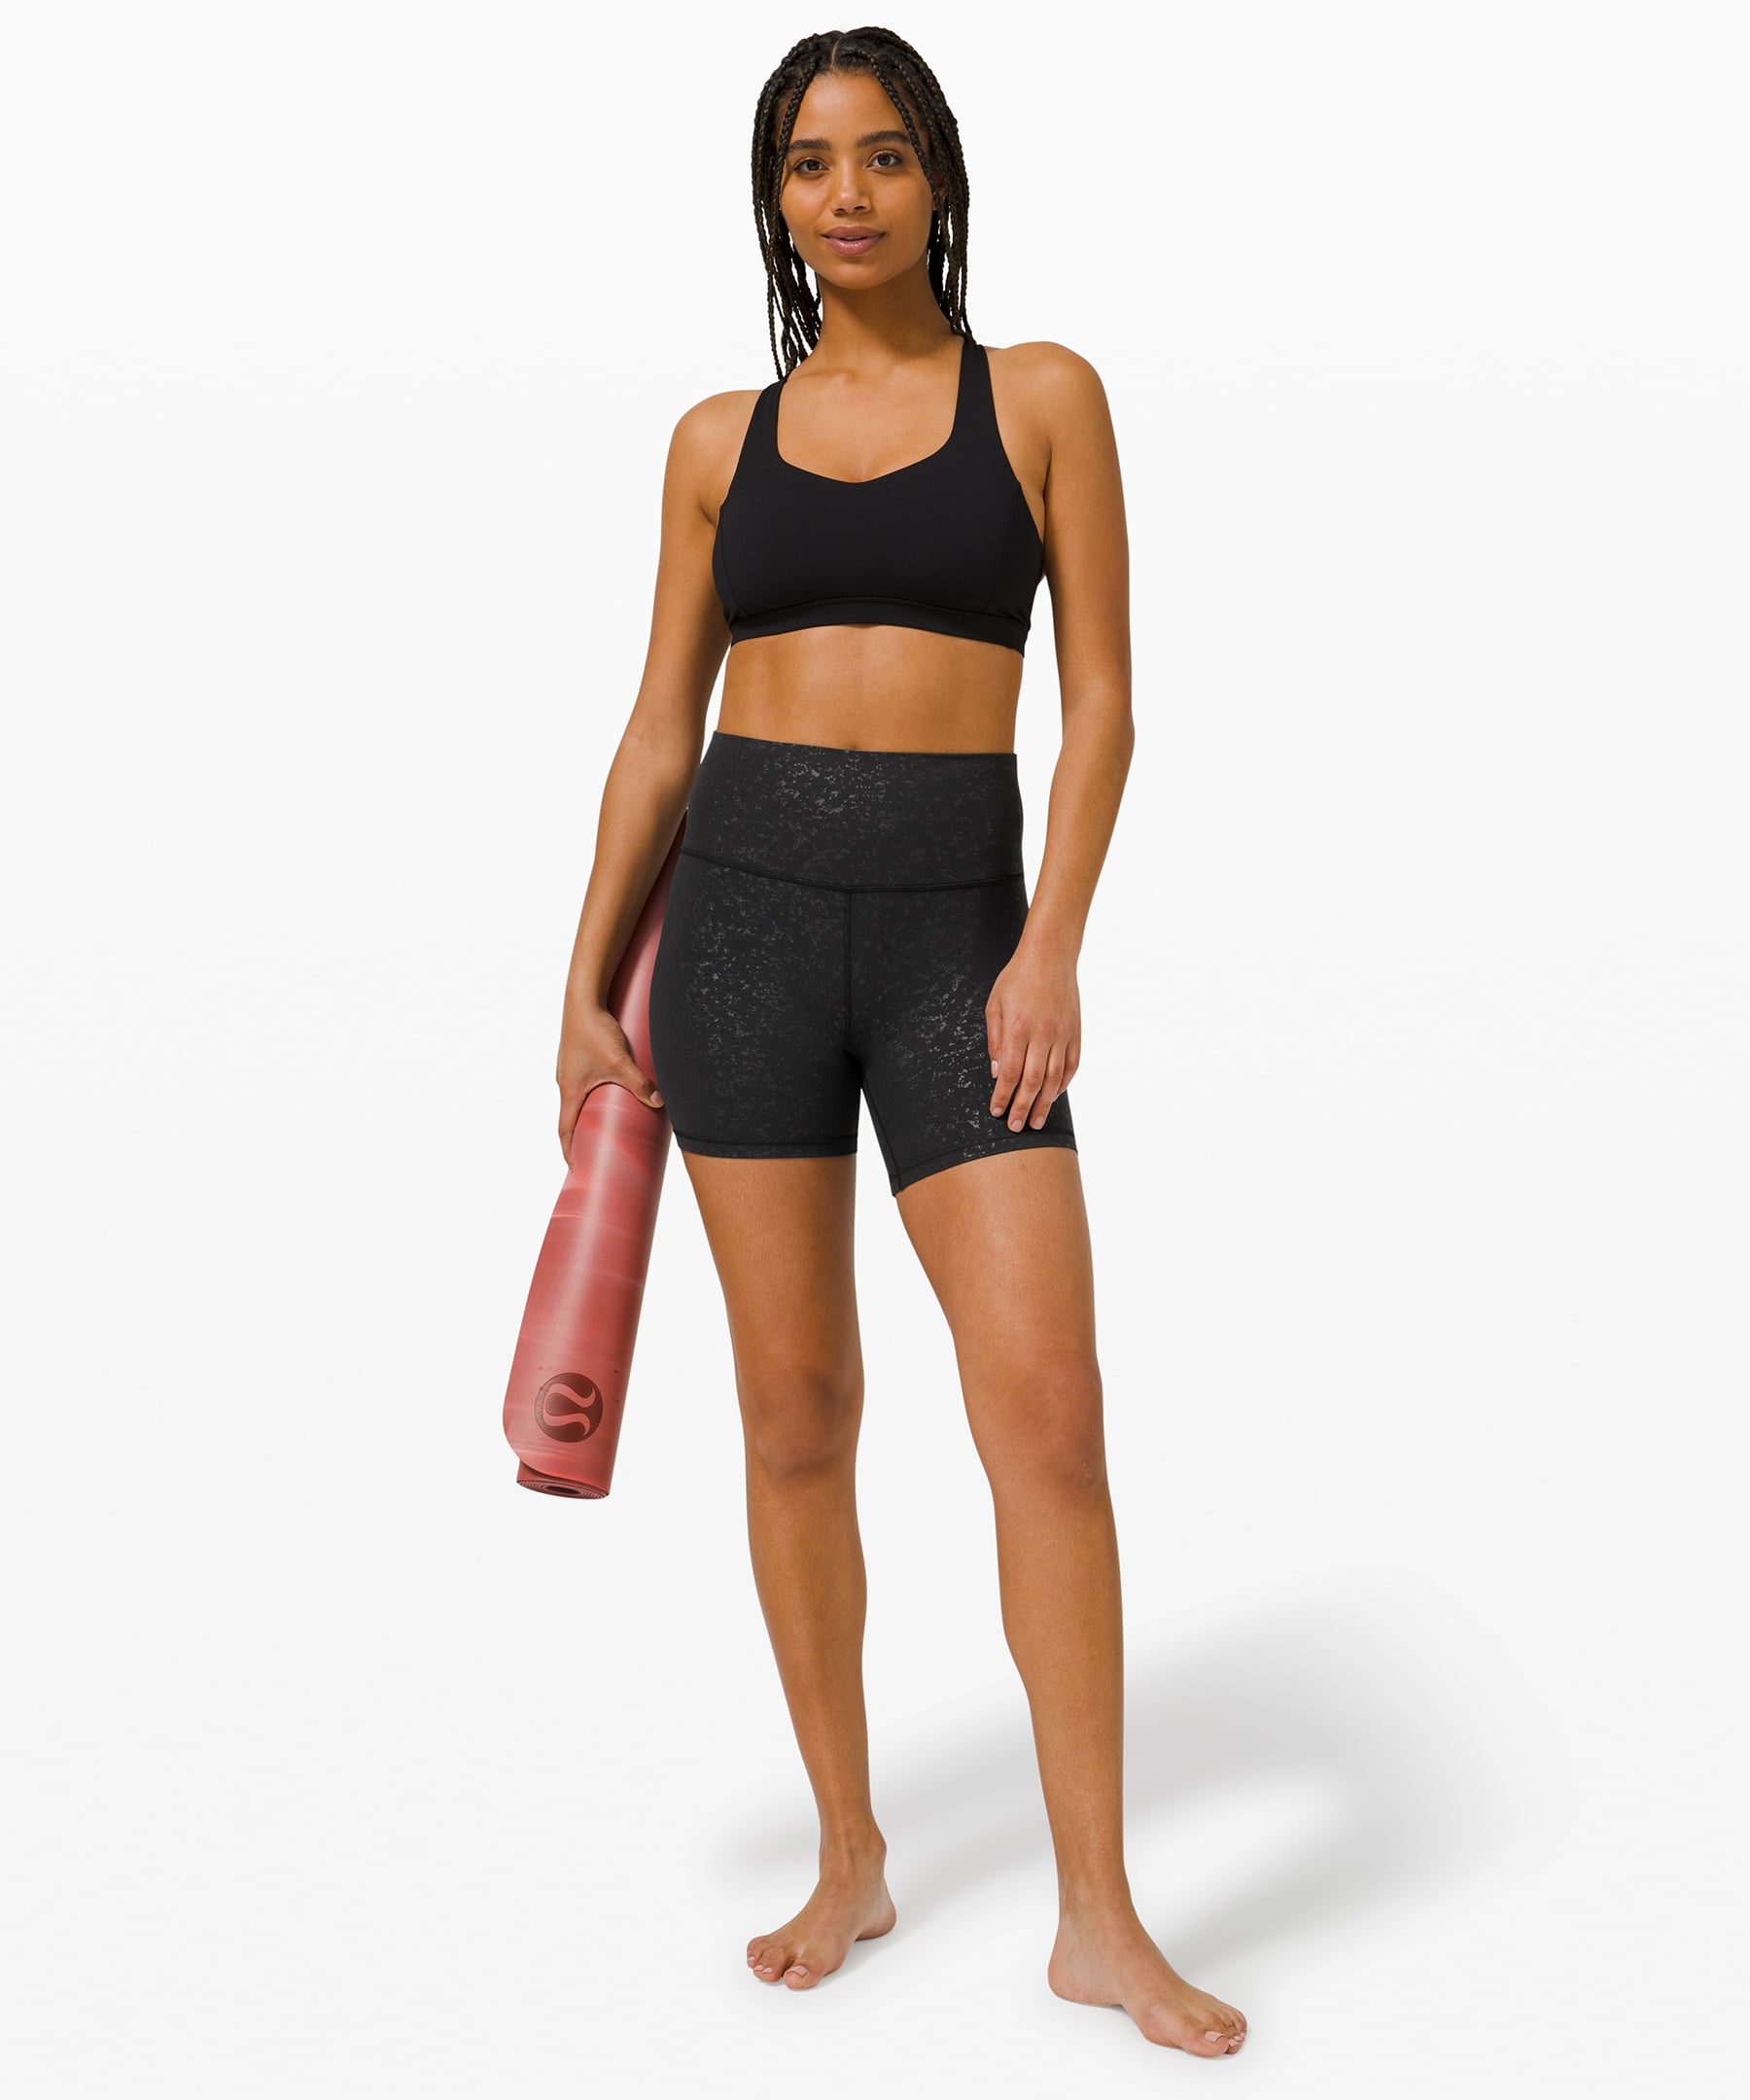 Post-workout fit pic: Align bra and align shorts : r/lululemon